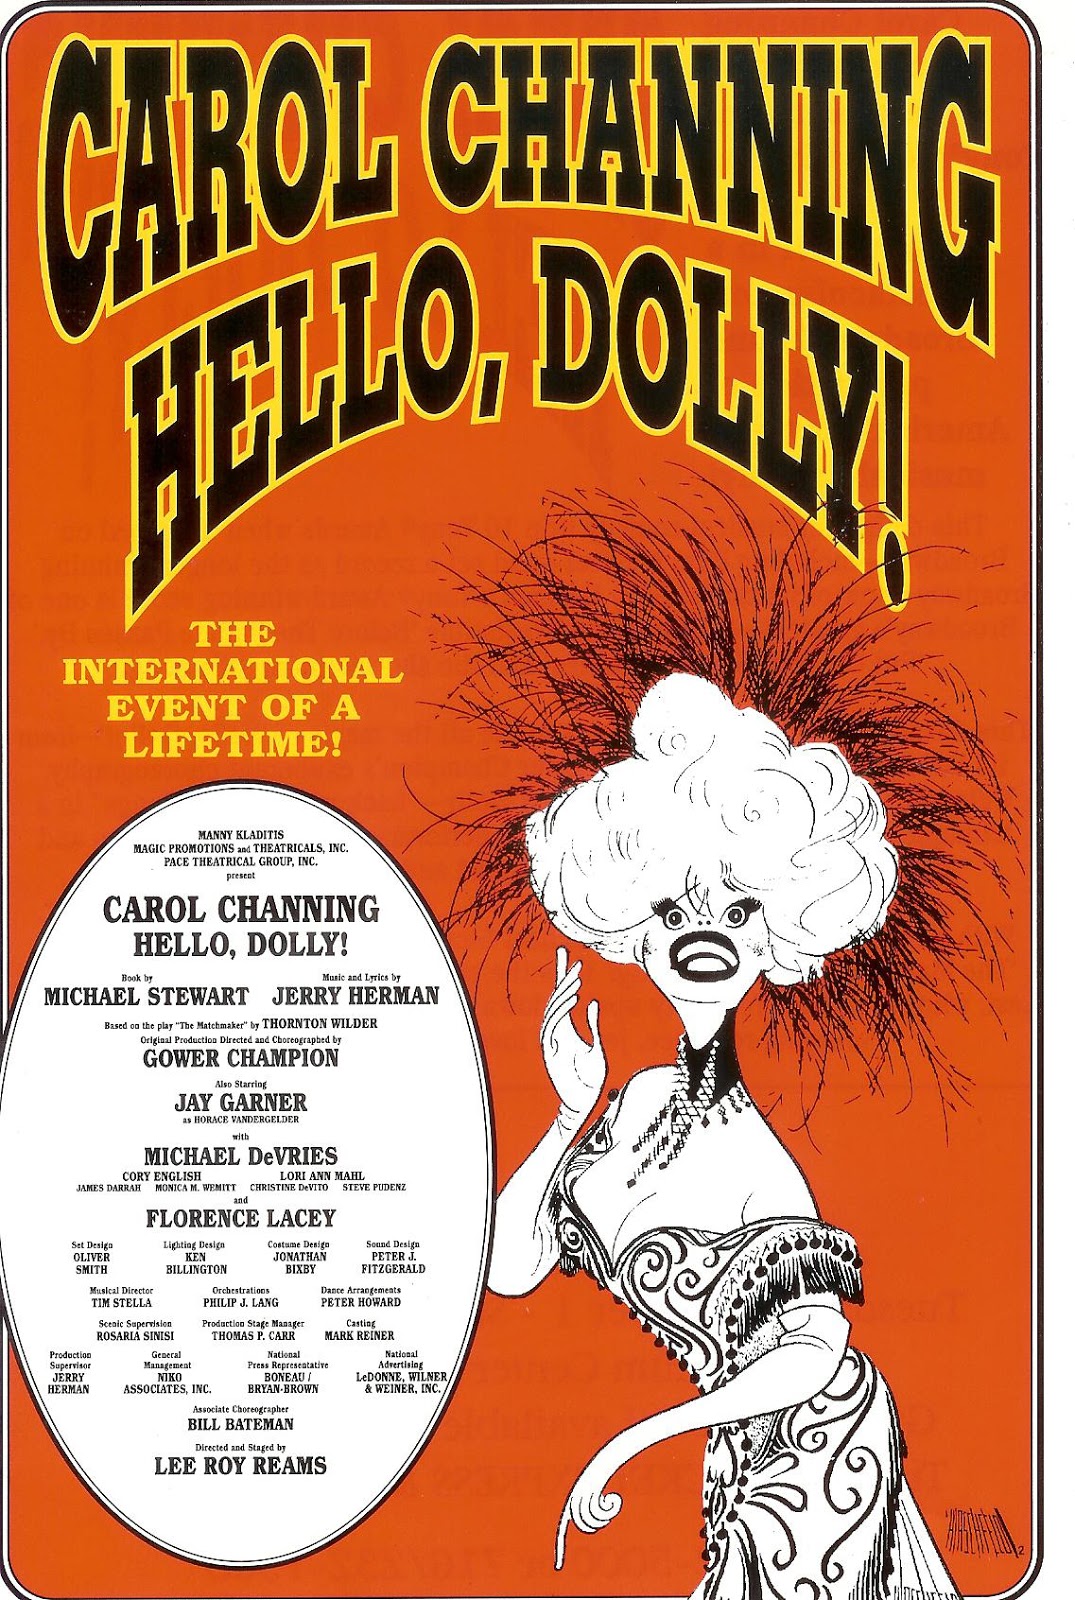 Christine DeVito Ermengarde, 1994 National Tour and 95 Broadway Revival of Hello, Dolly starring Carol Channing